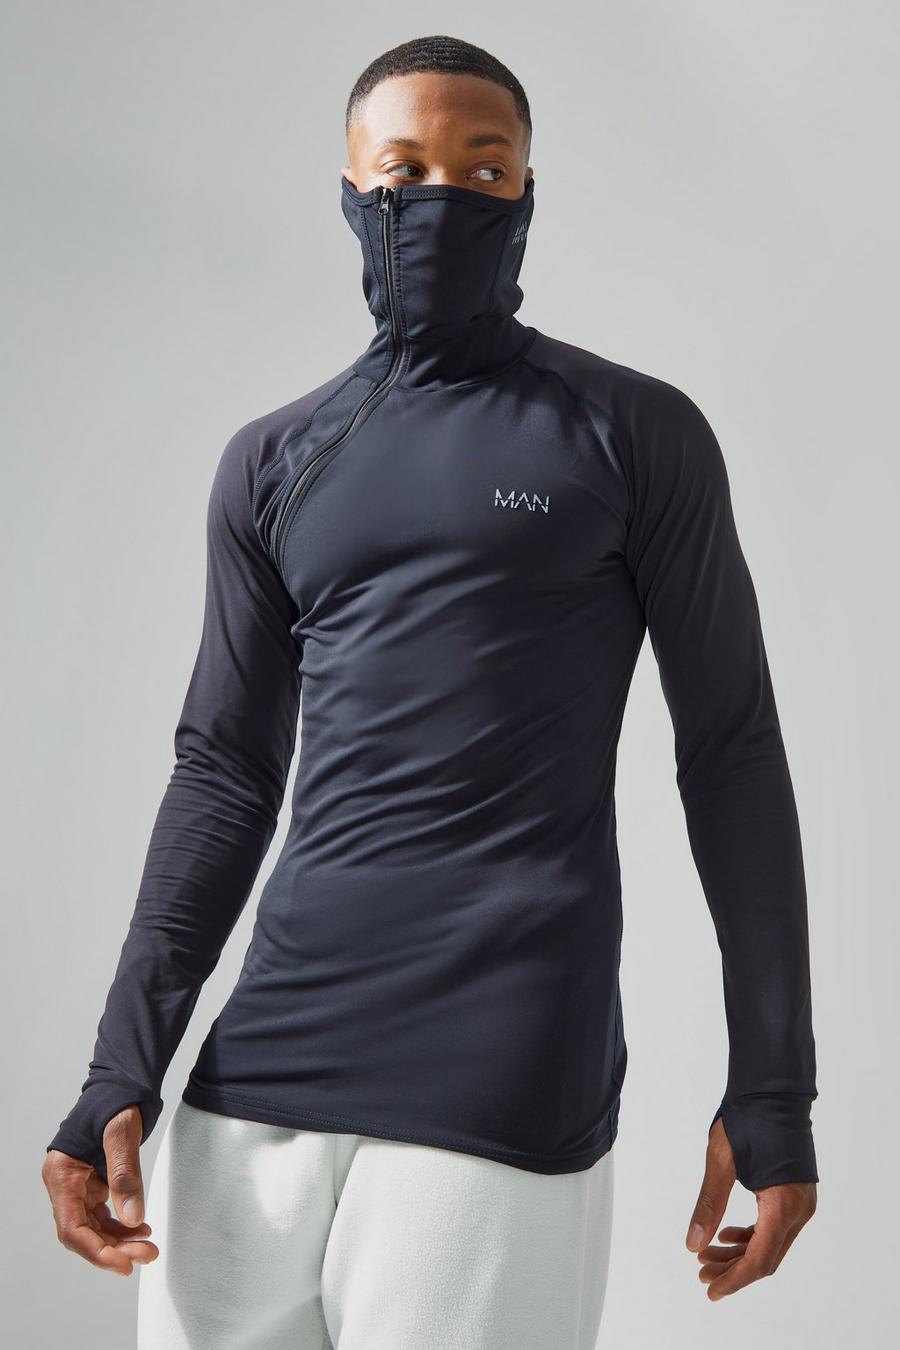 Maglia intima Man Active Face Covering Matte, Black image number 1